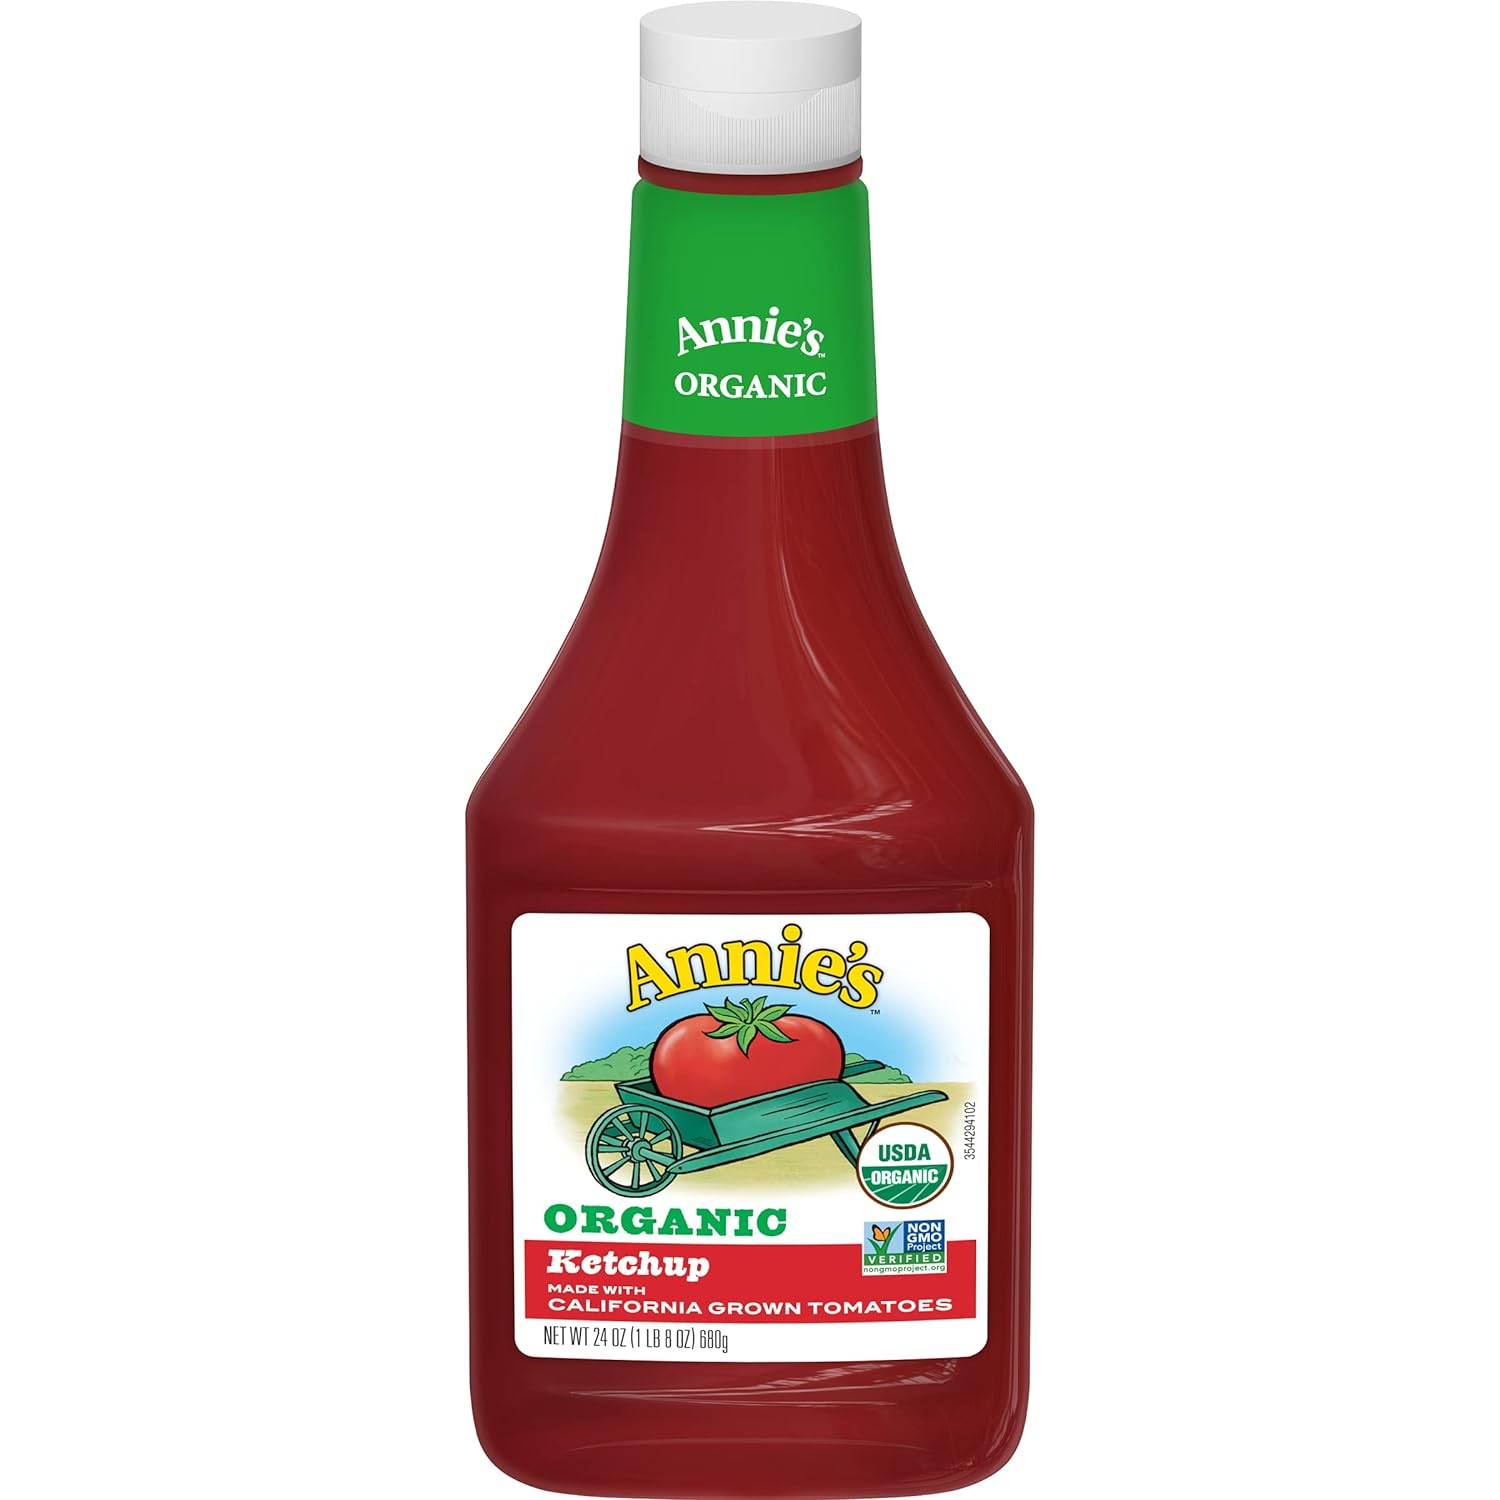 Annie's Homegrown Organic Ketchup, Gluten Free & USDA Certified Organic, 24 oz. (Pack of 12)